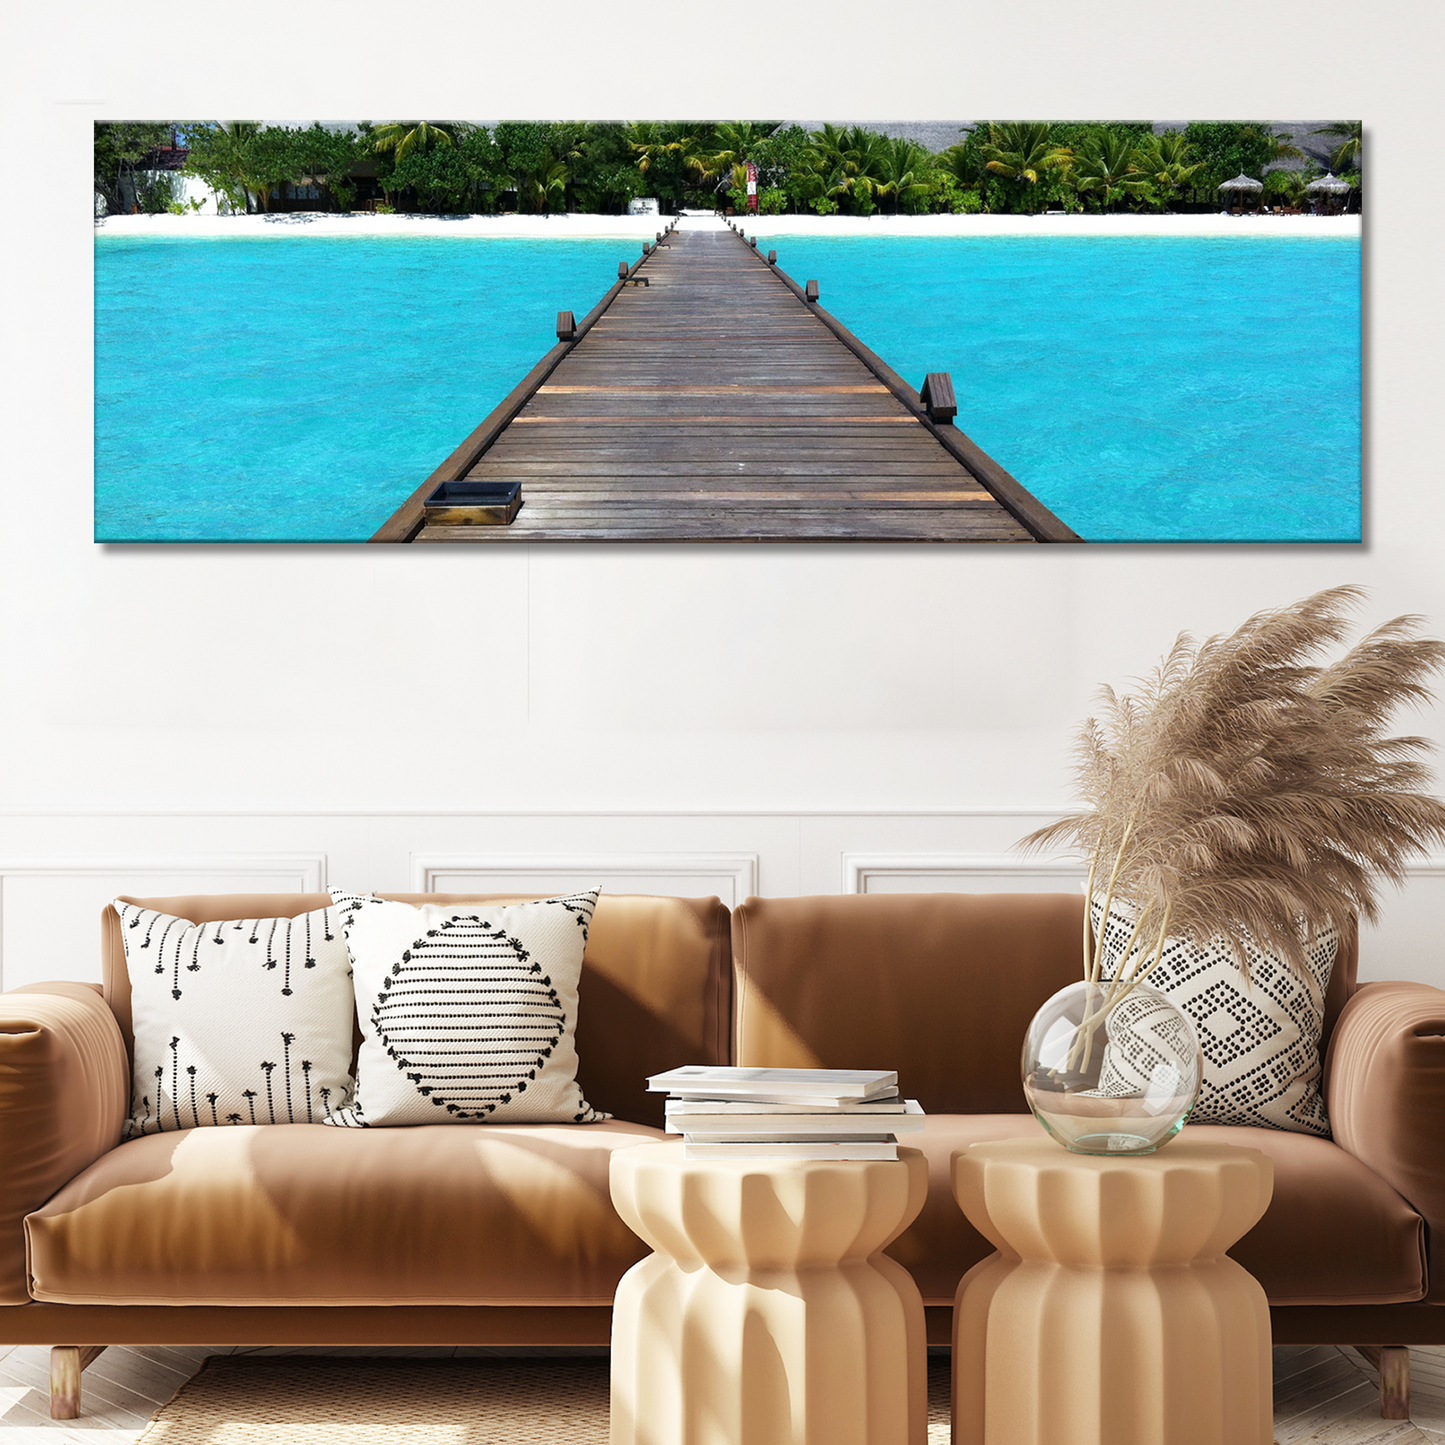 Aqua Blue Sea Canvas Wall Art - Image by Tailored Canvases